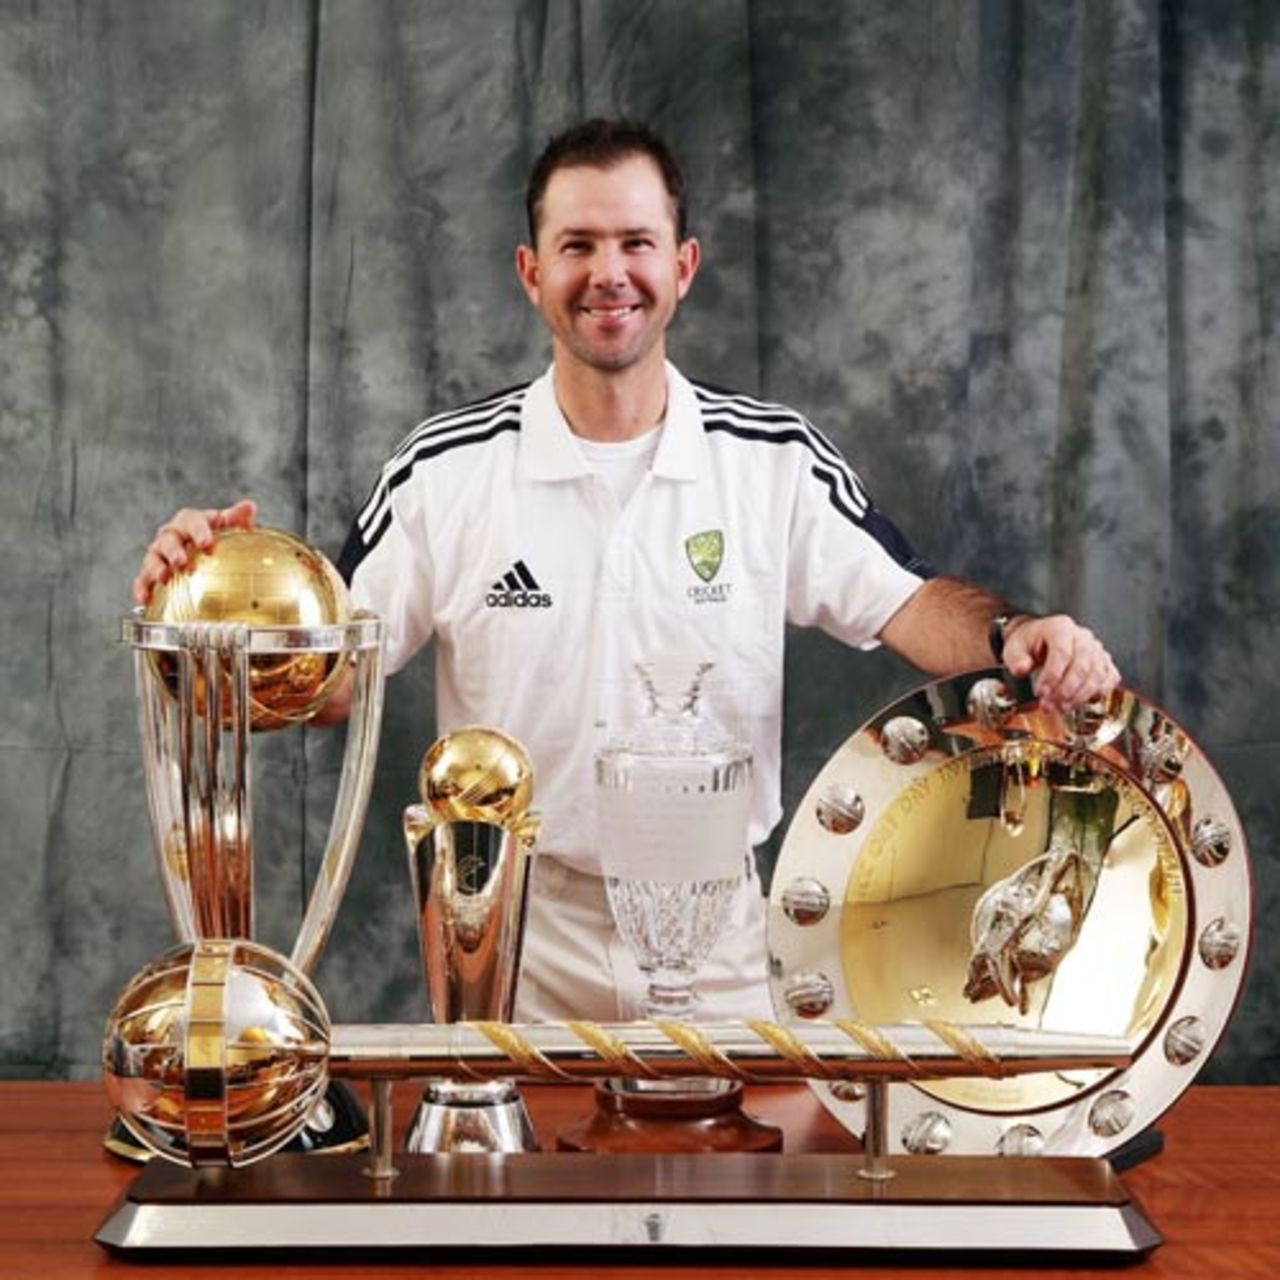 Ricky Ponting poses with (from left) the World Cup, the Champions Trophy, The Ashes, the ICC ODI trophy and the ICC Test trophy (in front), during a portrait session, July 2, 2007